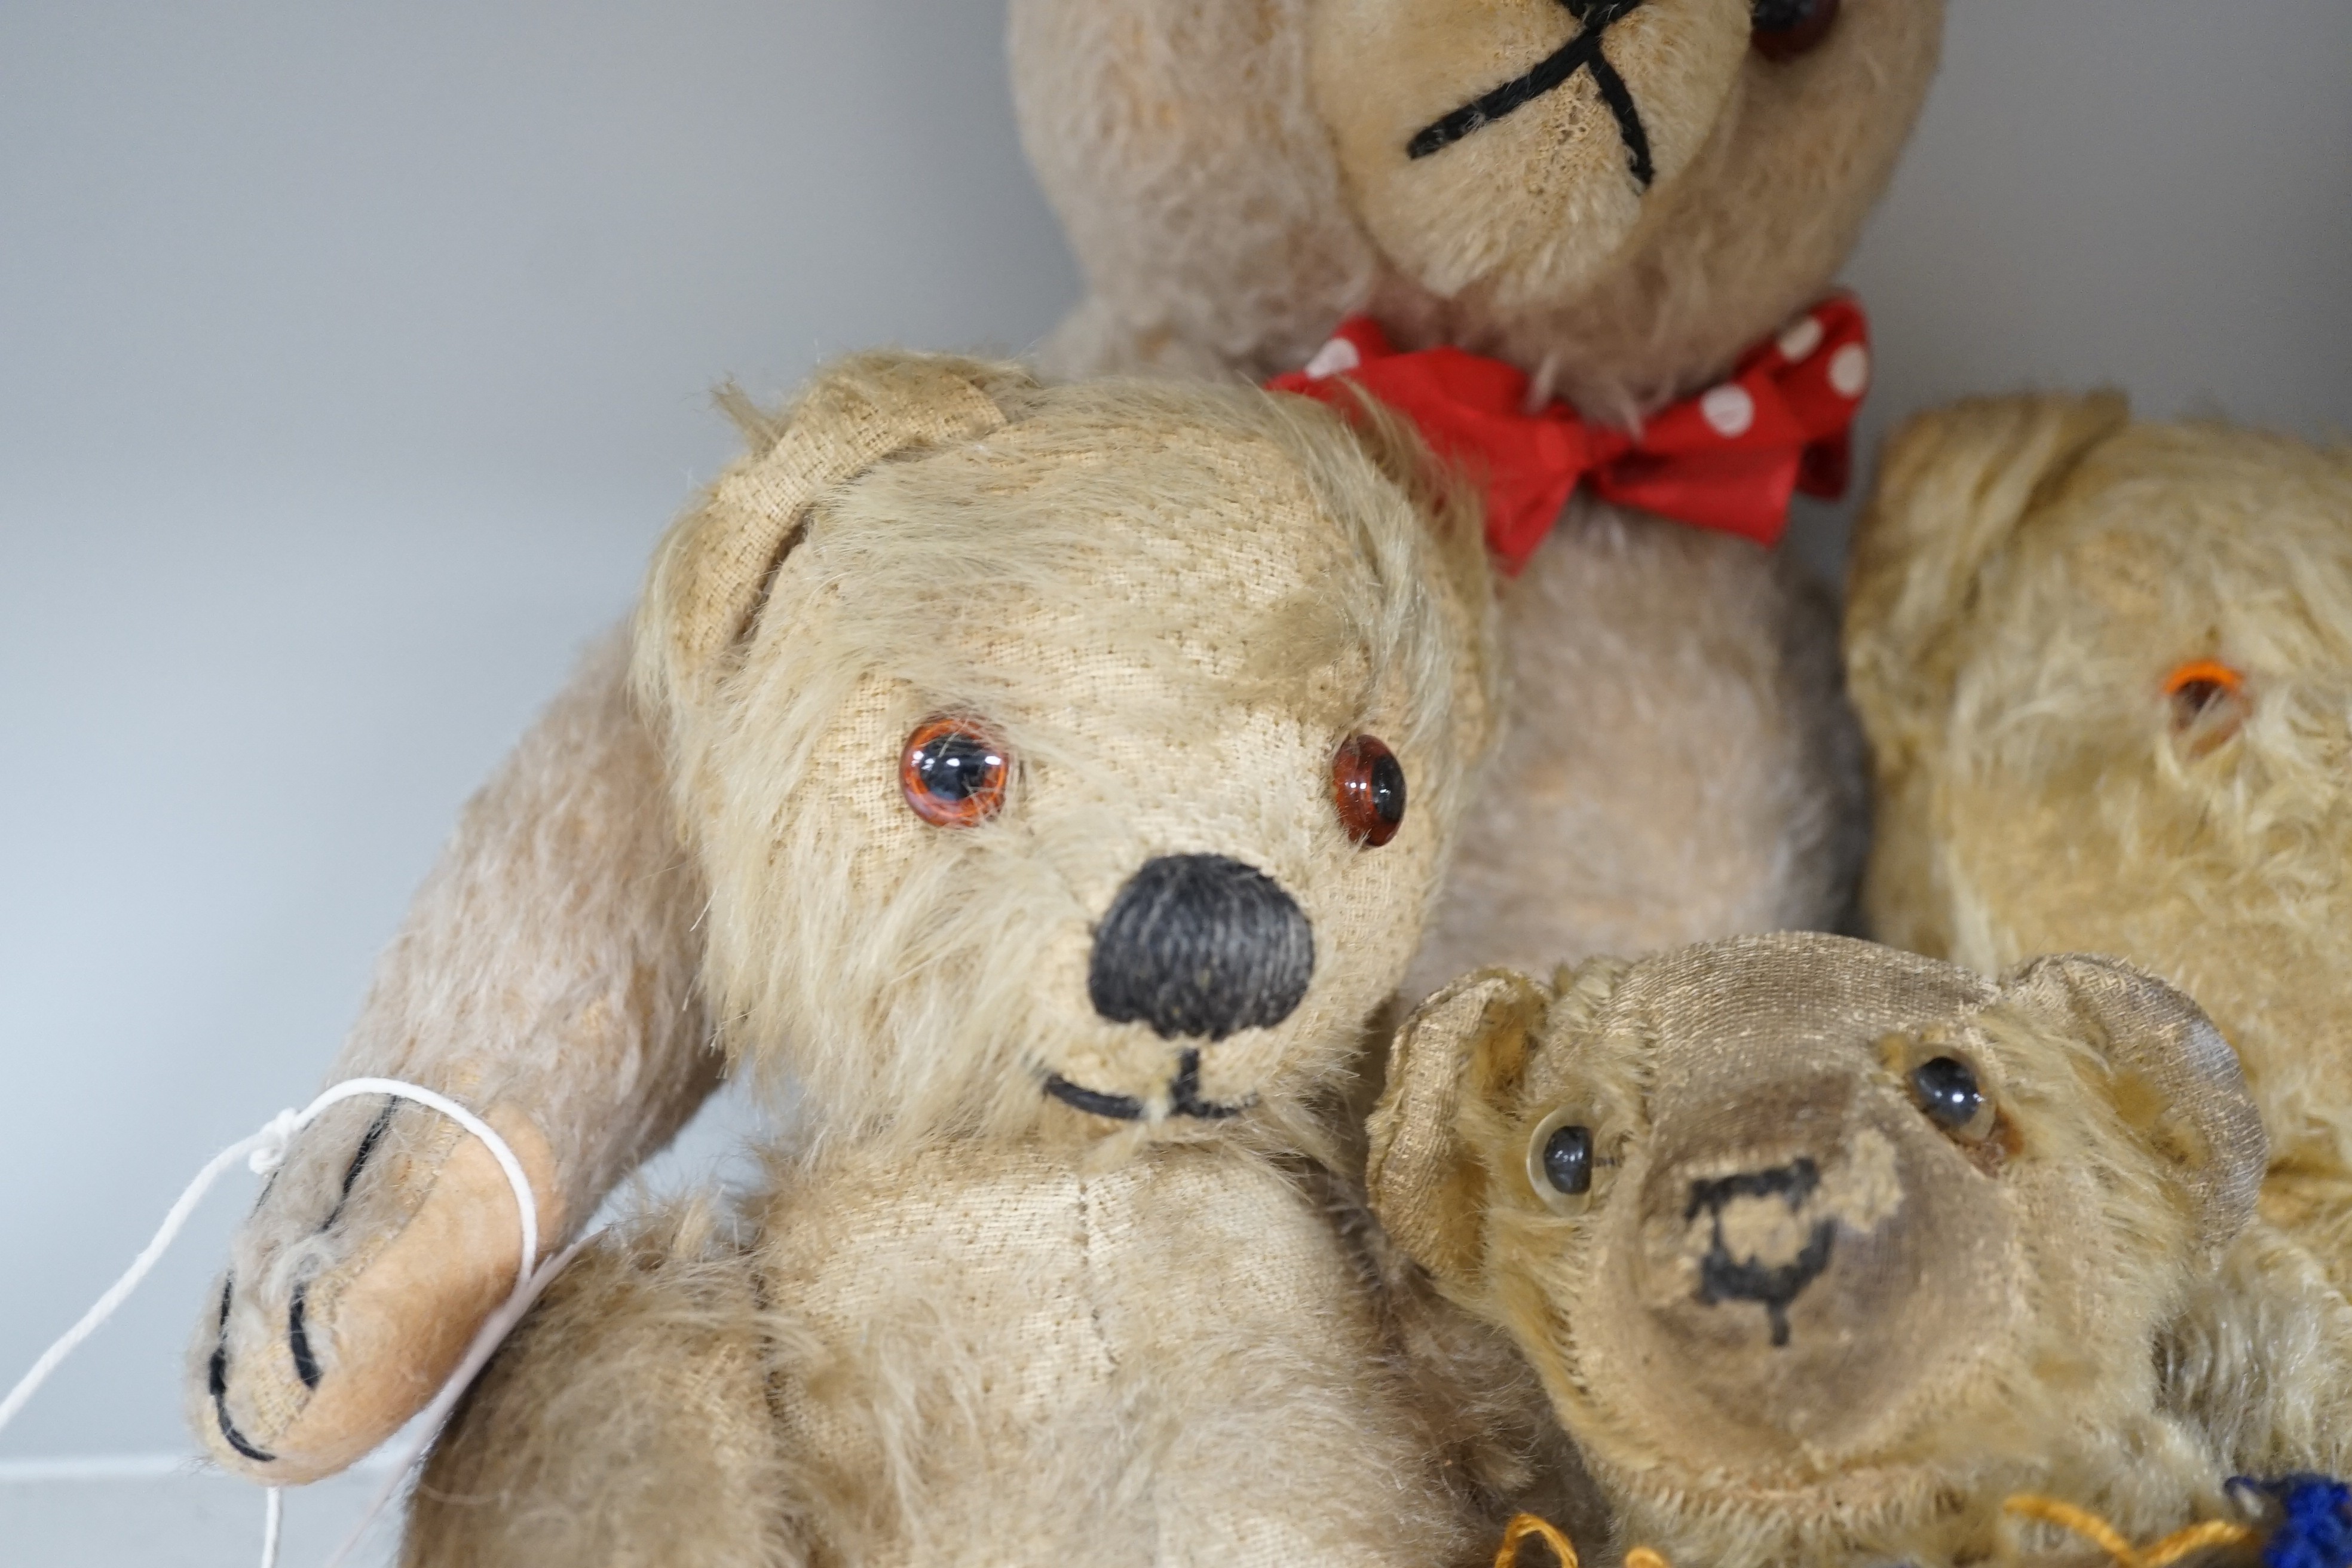 Six various Teddy bears, three early English, another by Chad Valley